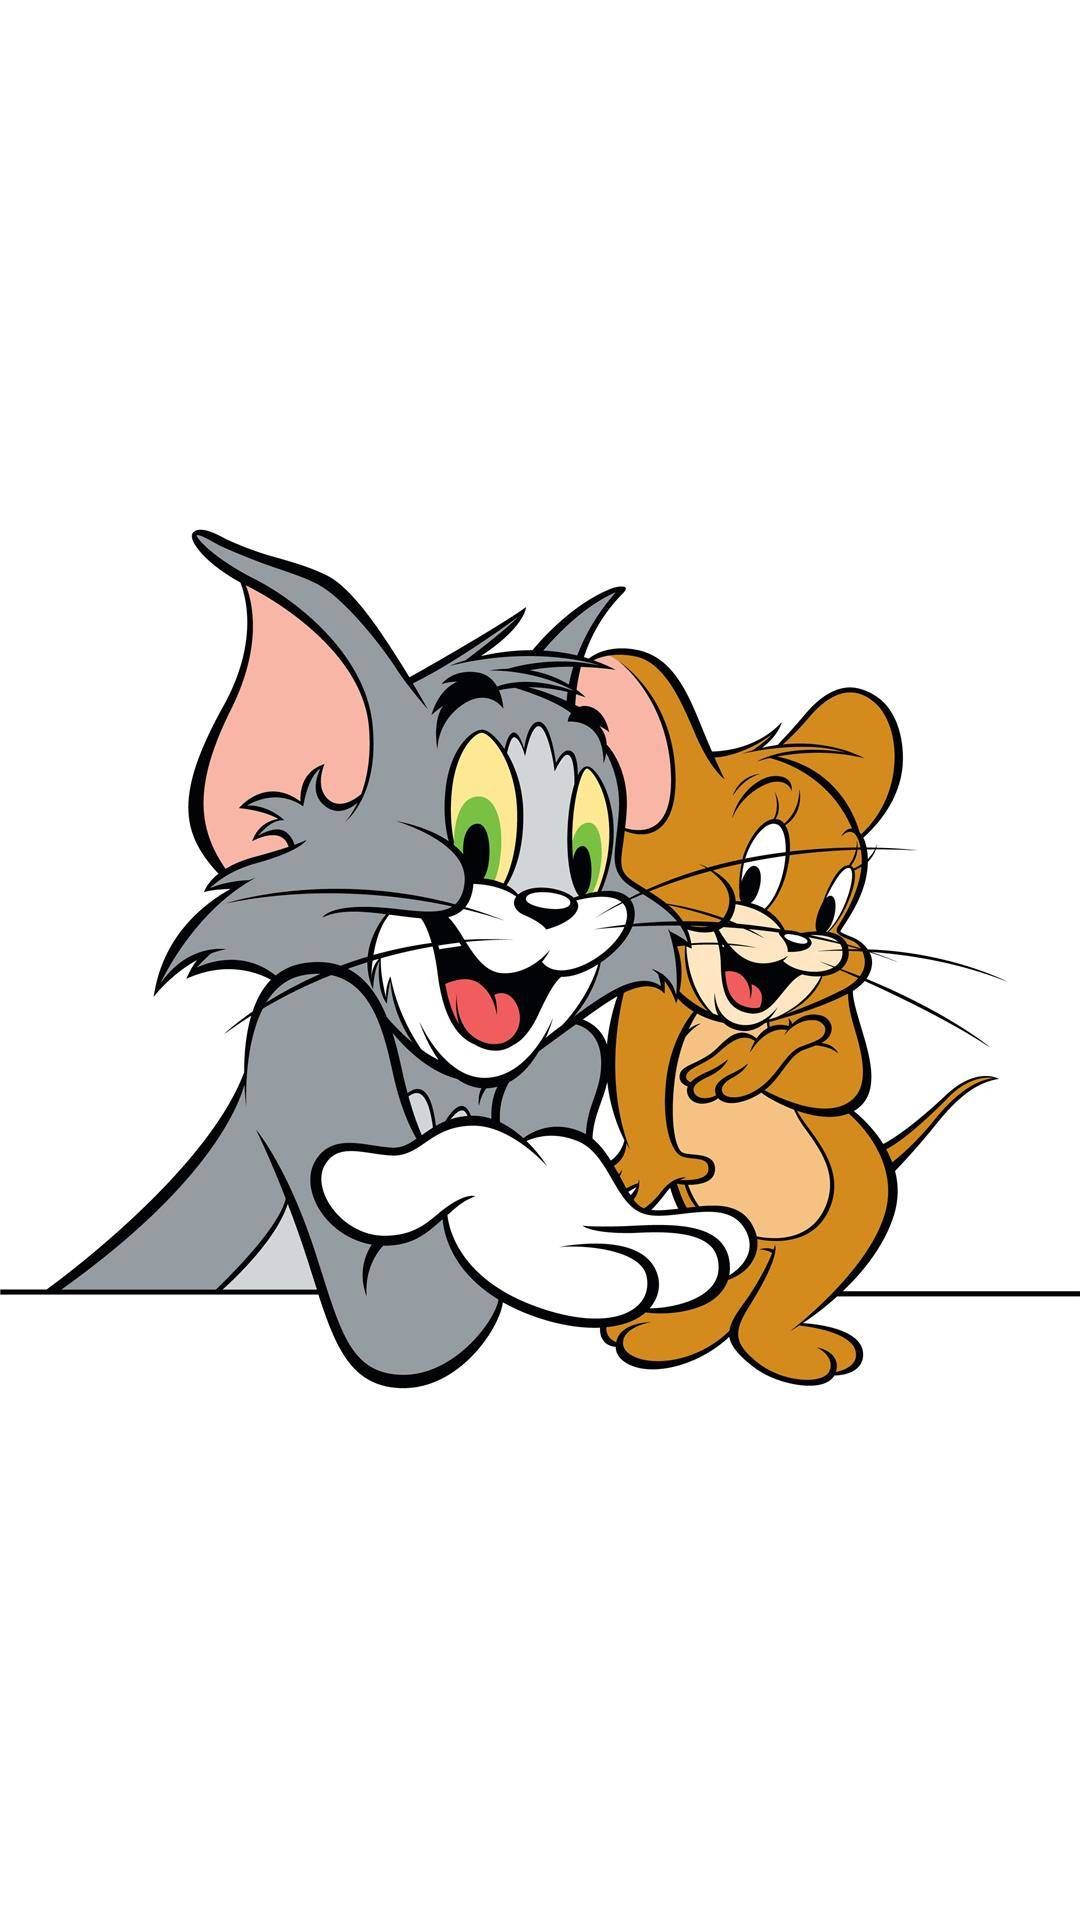 Tom And Jerry S7 Edge Wallpaper - Tom And Jerry Wallpaper Iphone - HD Wallpaper 